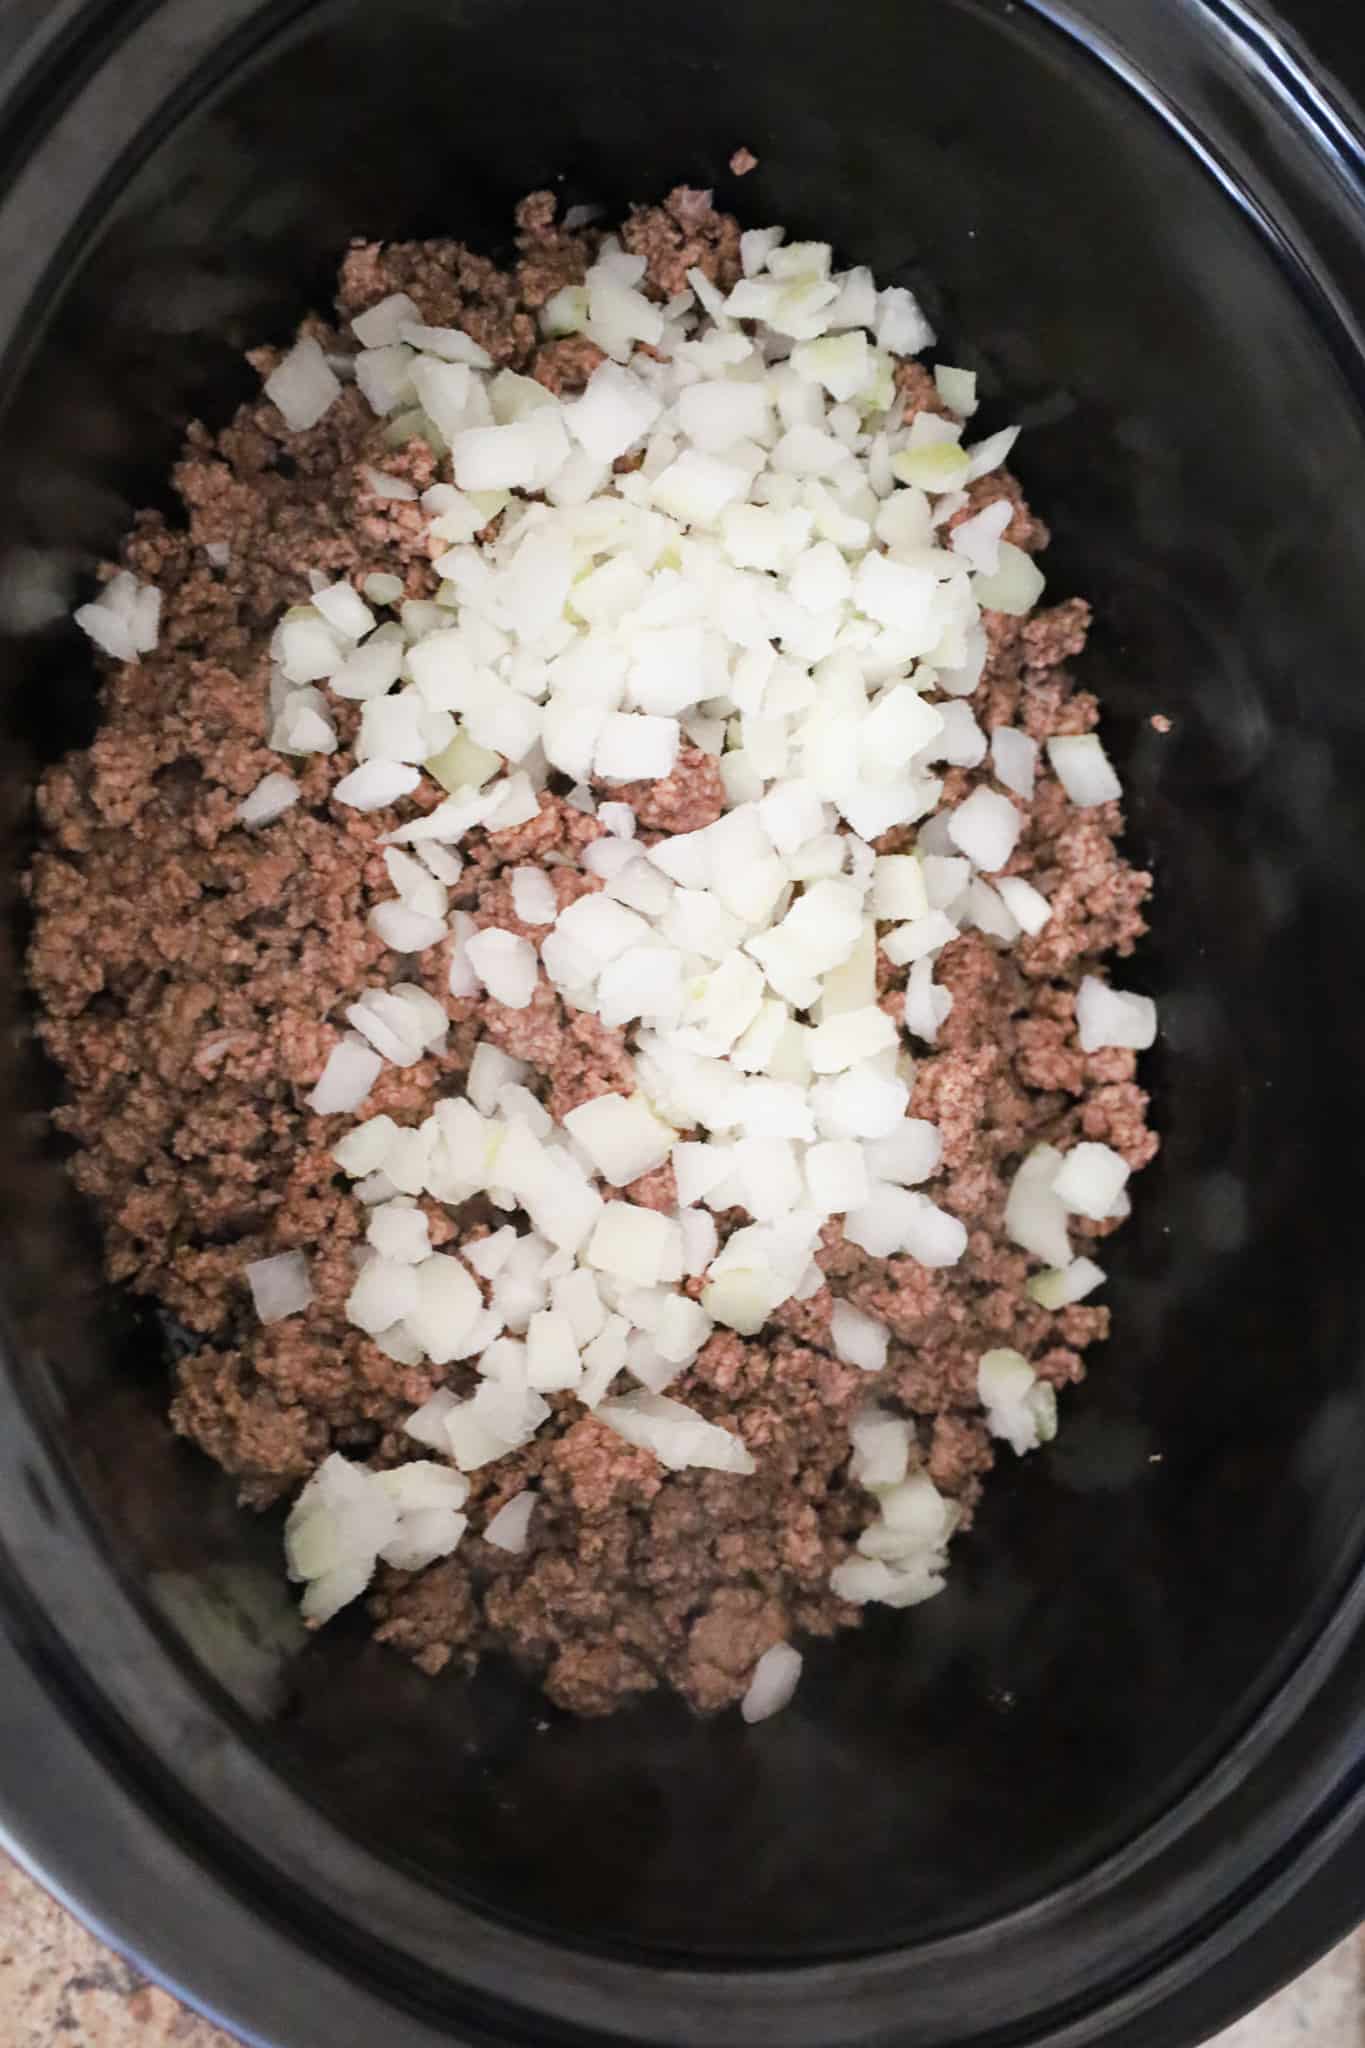 diced onions on top of cooked ground beef in a crock pot